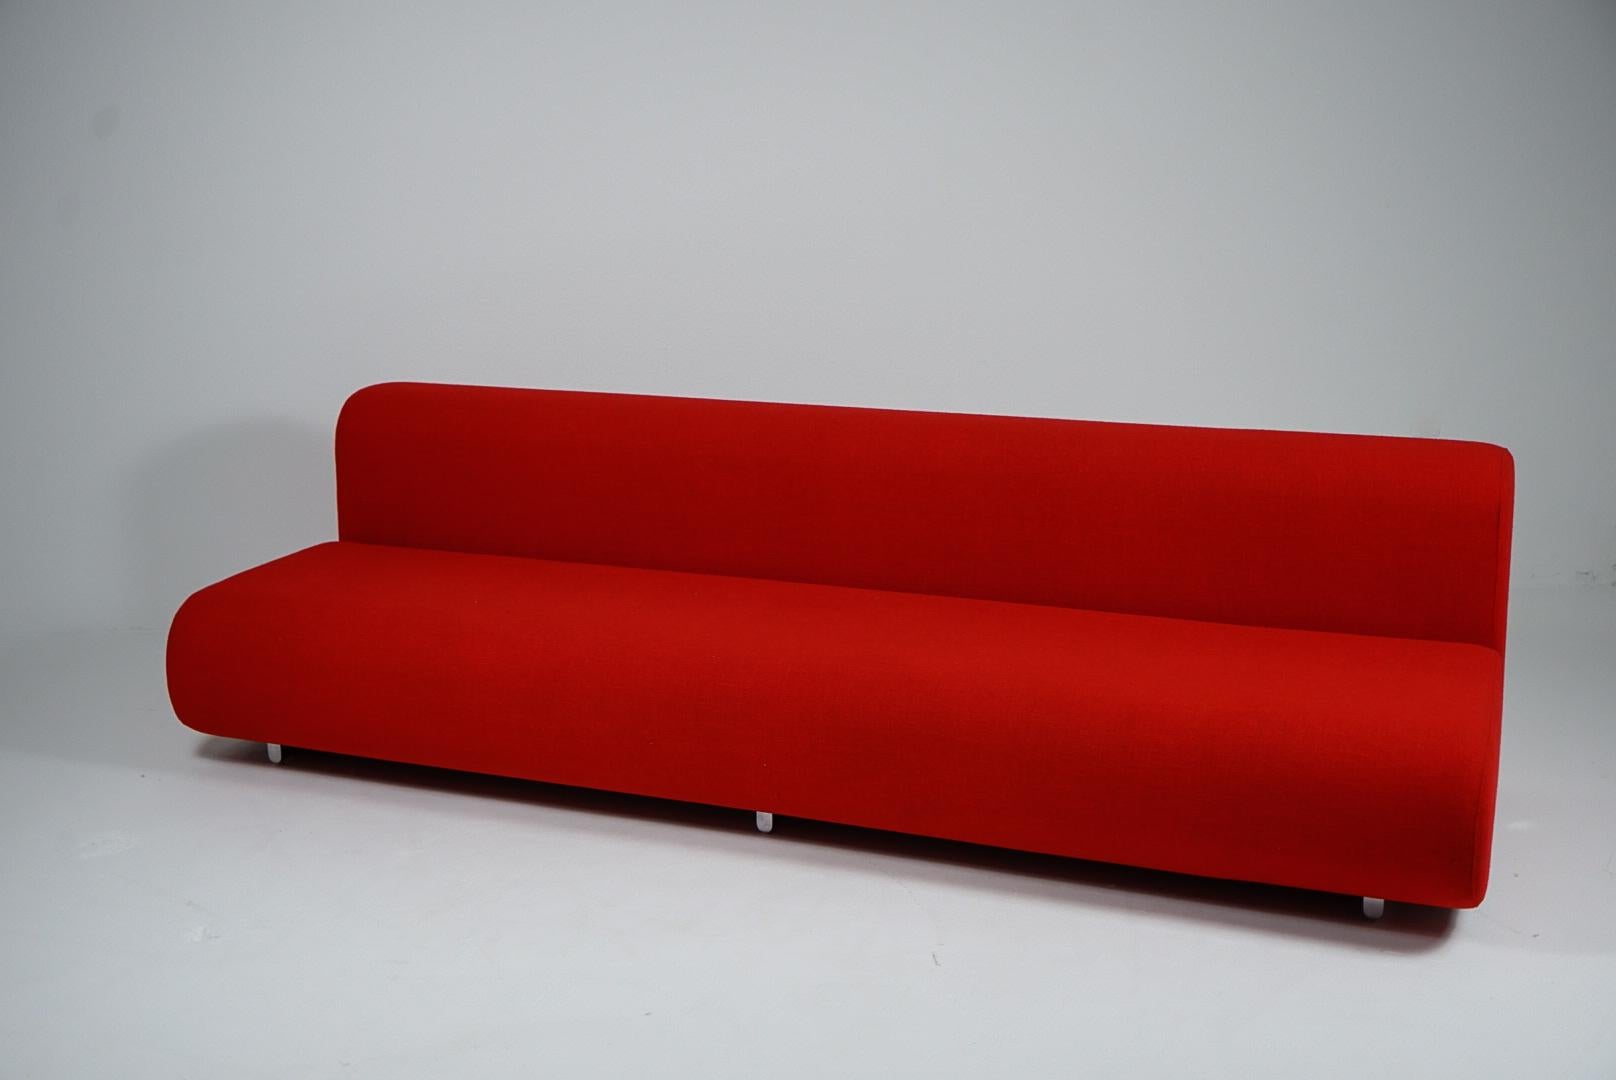 Knoll Suzanne sofa designed in 1965 by Kazuhide Takahama for Gavina Italy : Knoll. This sofa is the rare 8 ft long version which is unavailable from Knoll. Kuramatas Suzanne sofa is a Mid-Century Modern design that often is confused as post modern